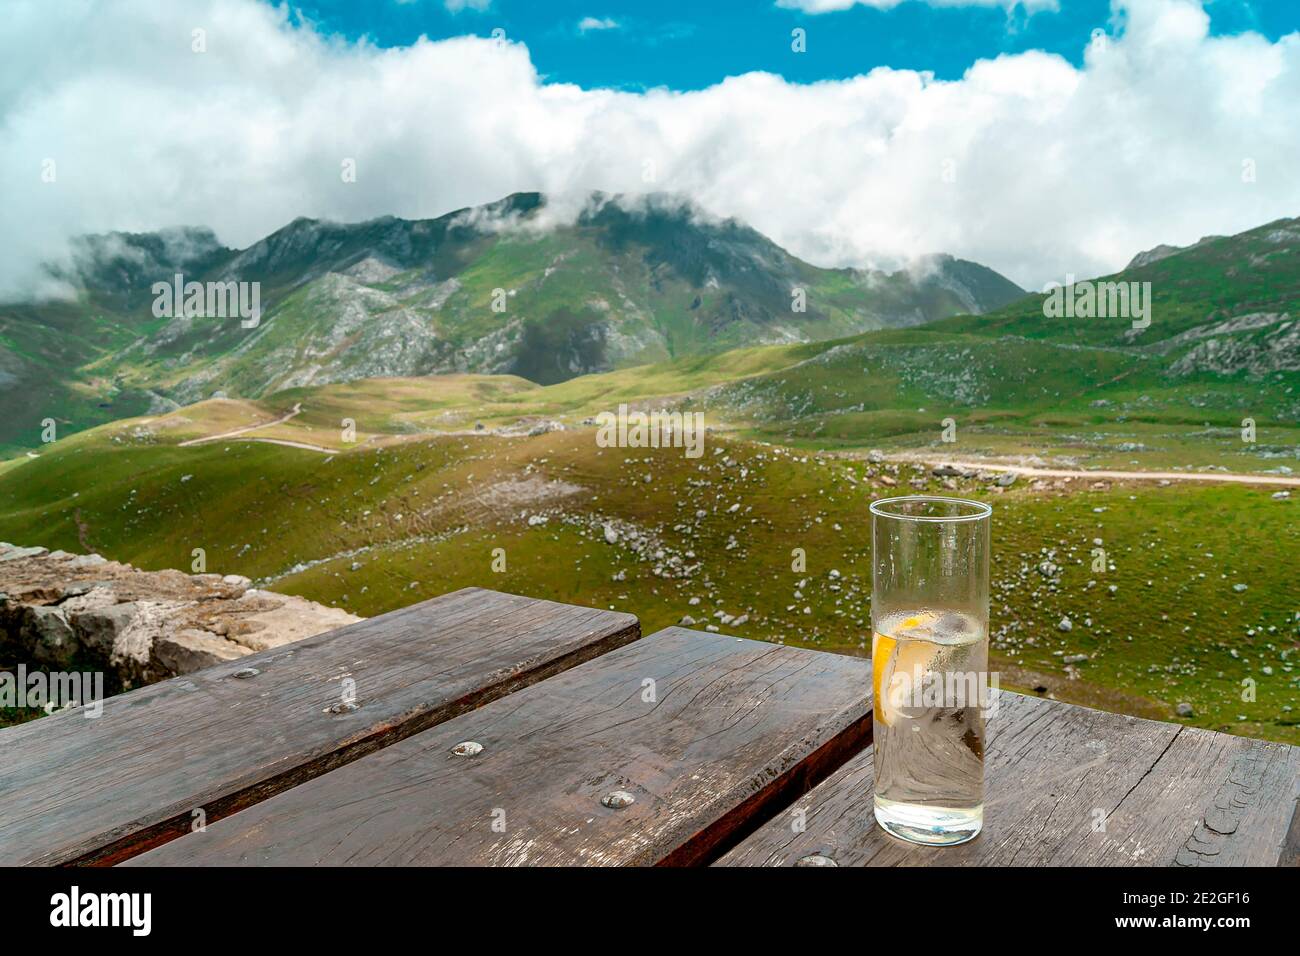 Crystal glass on table in the mountains.The photography aims to show the relaxation and disconnection that nature offers us. Stock Photo